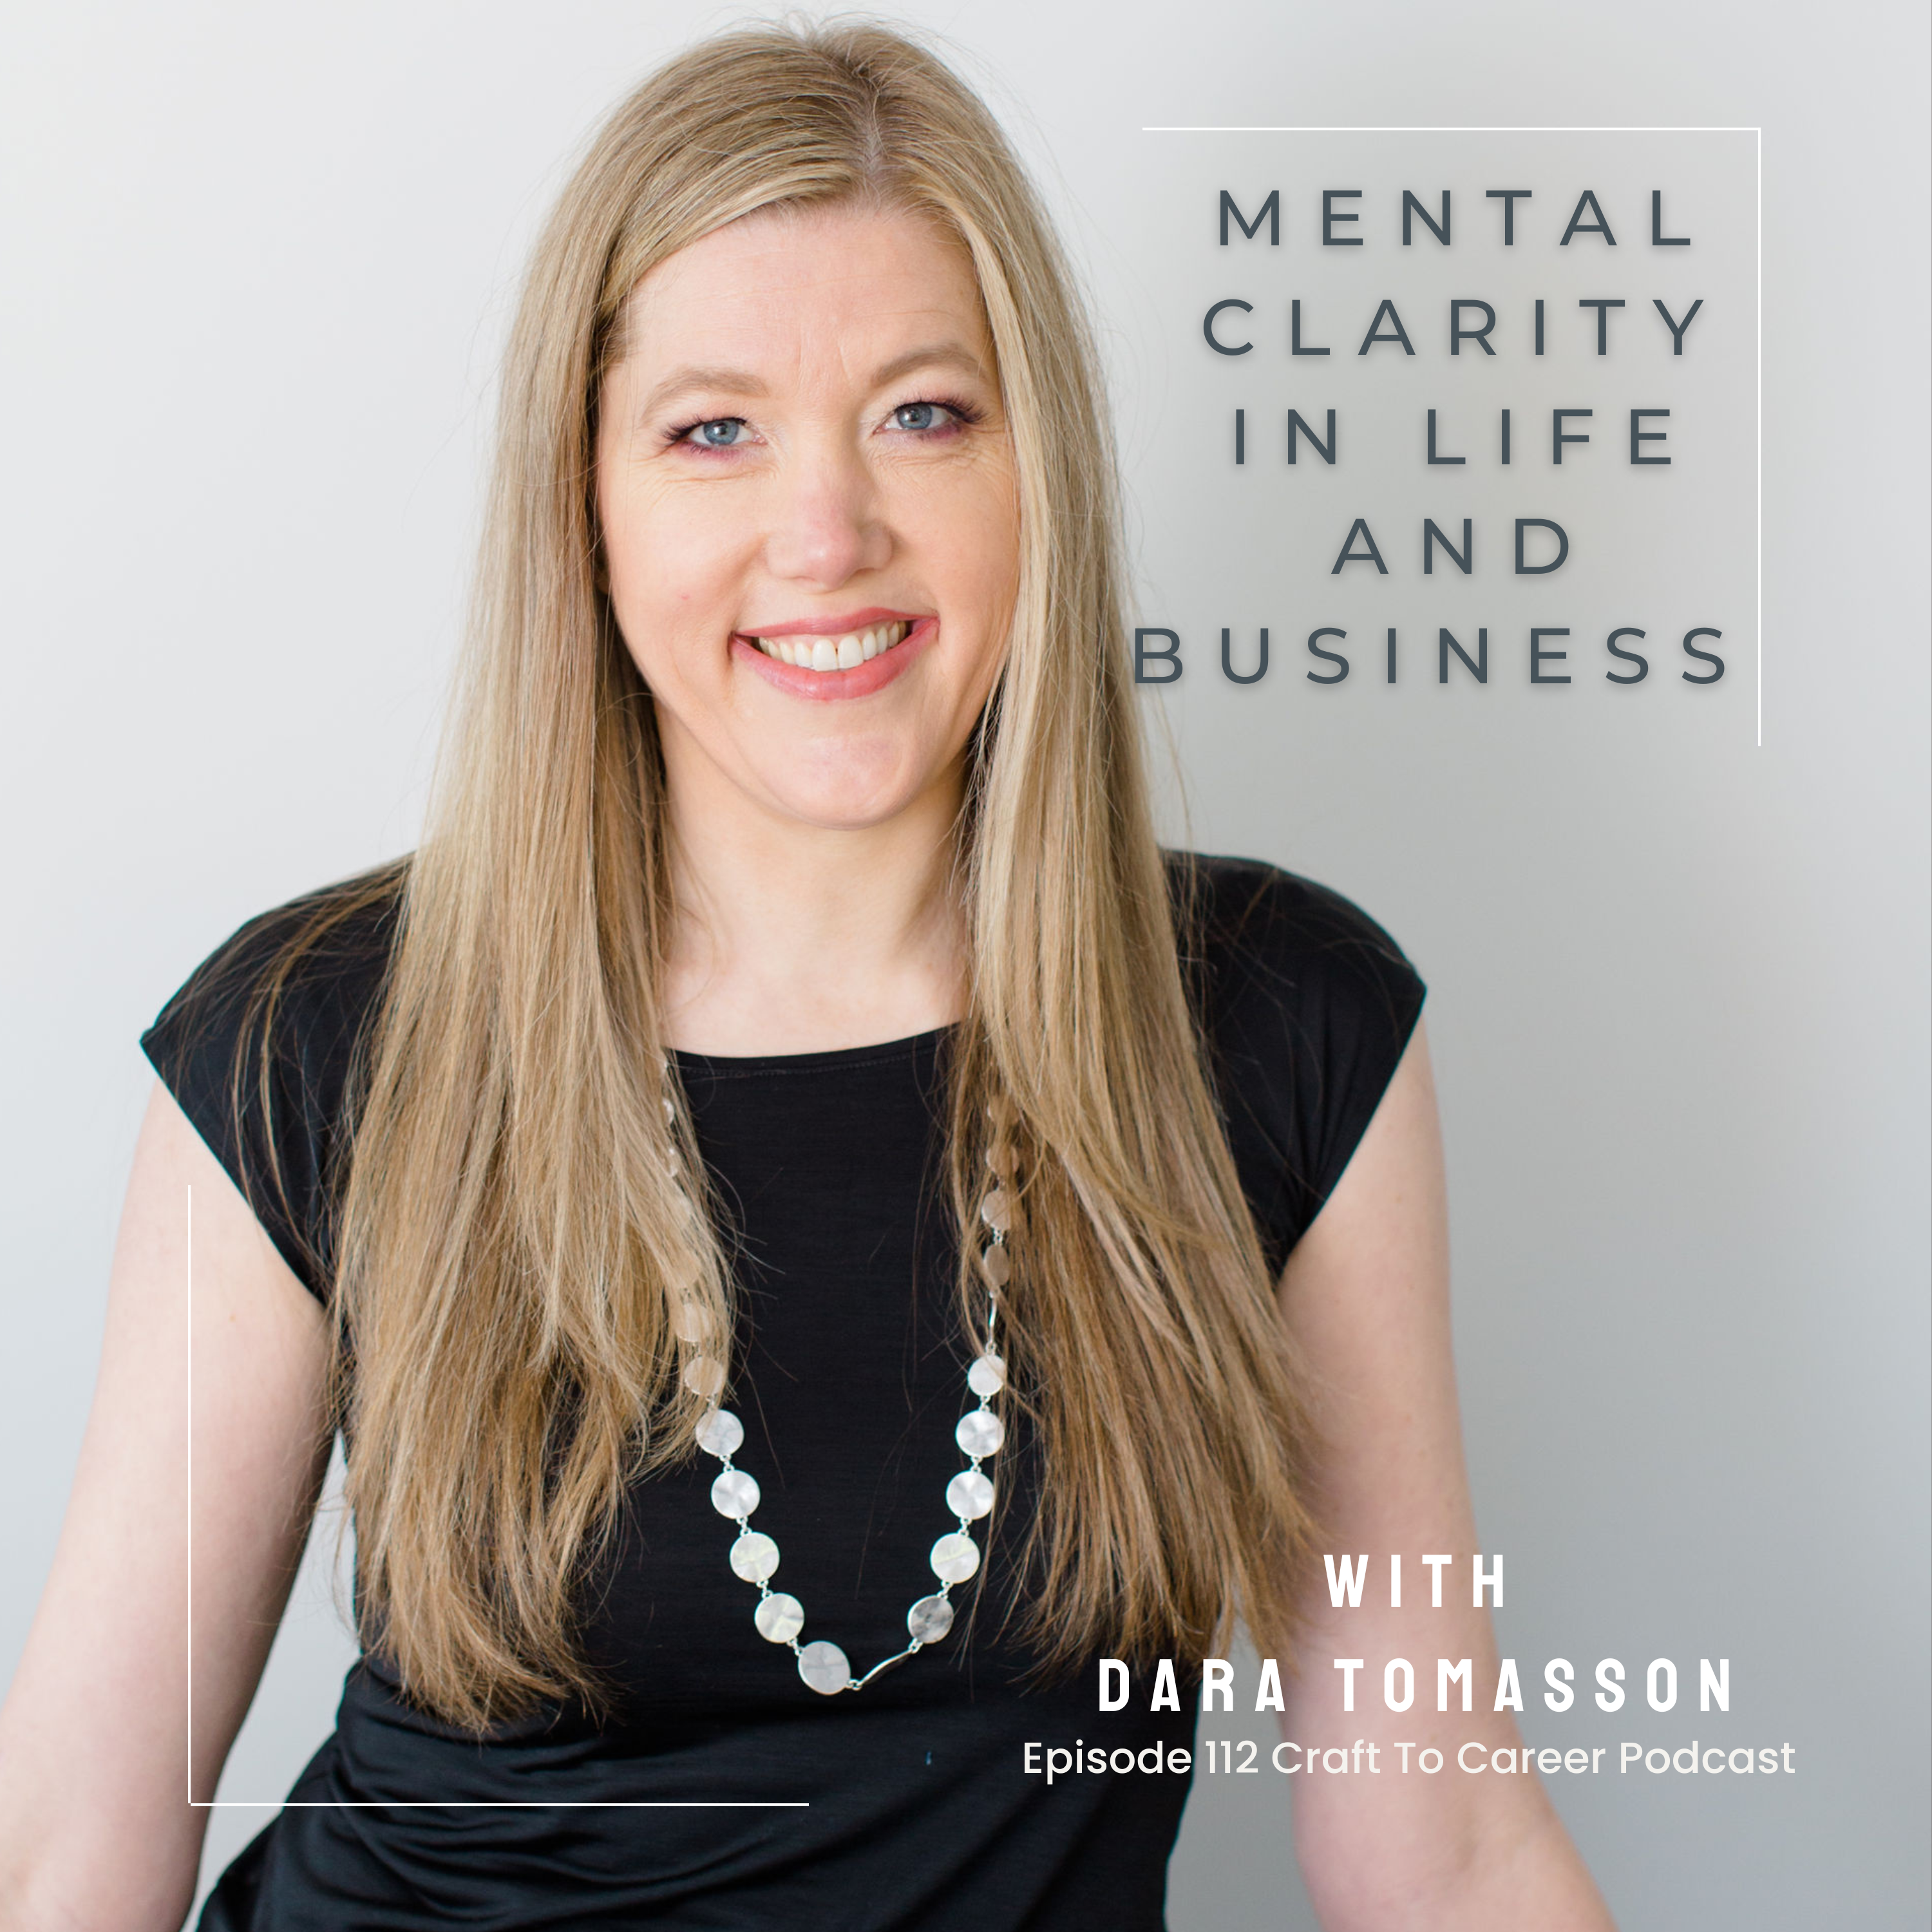 Mental Clarity in Life and Business